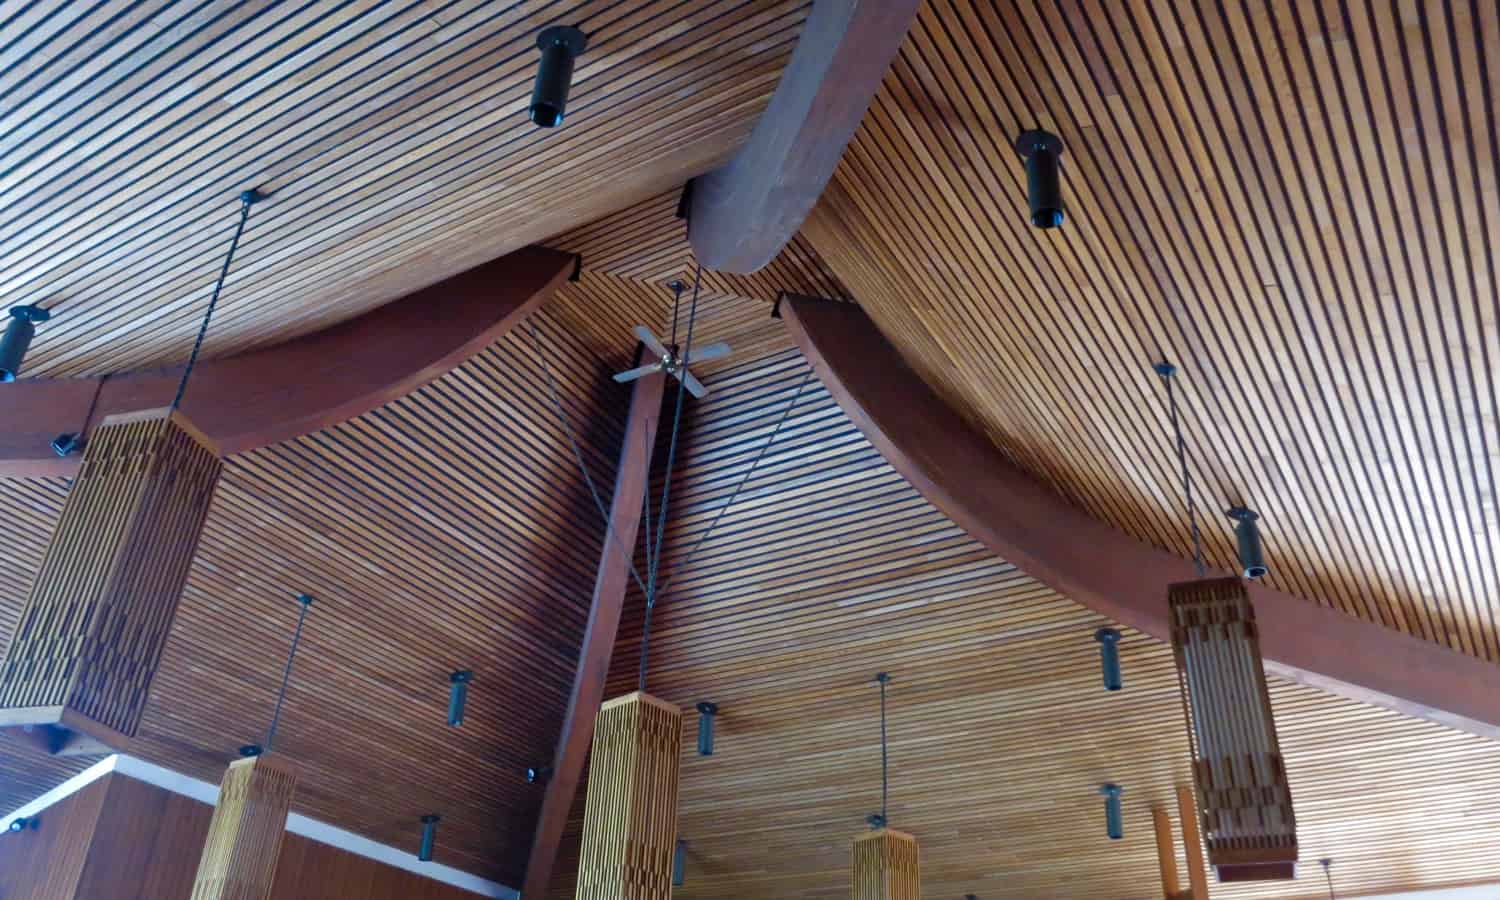 Detail of the wooden ceiling in the sanctuary highlighting the uplift